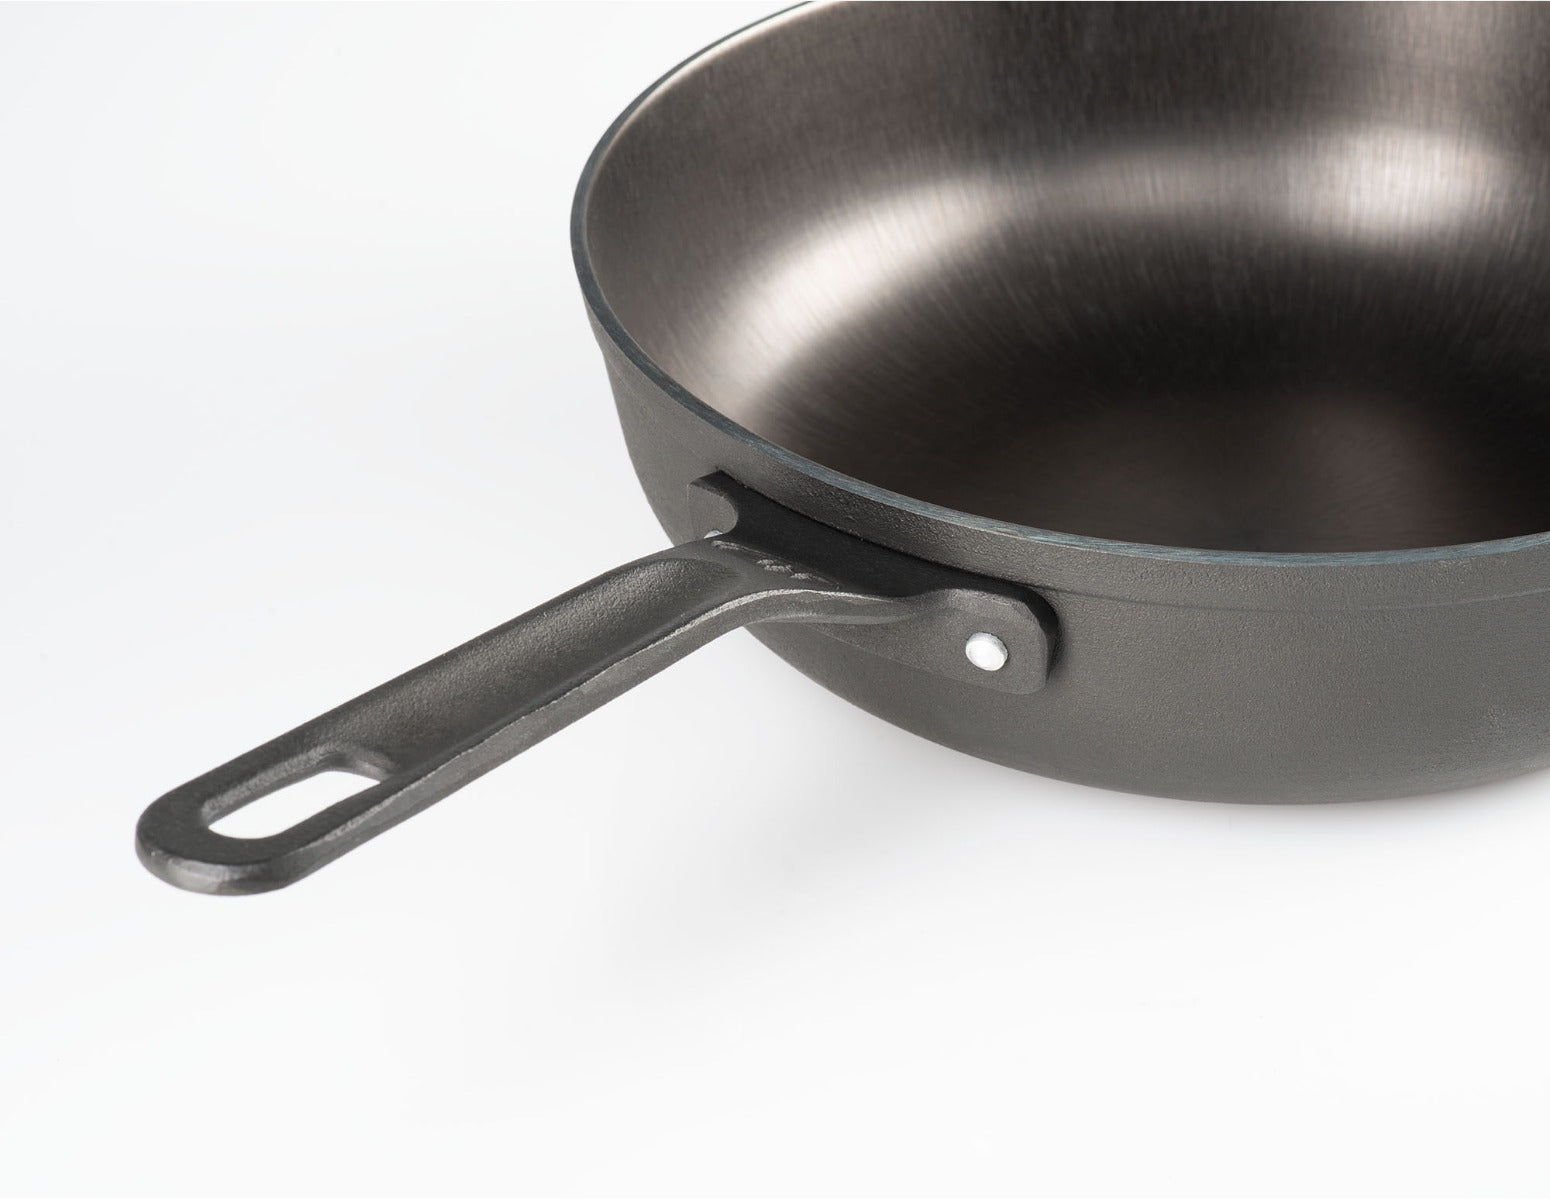 GSI Outdoors Guidecast Deep Fry Pan 10in